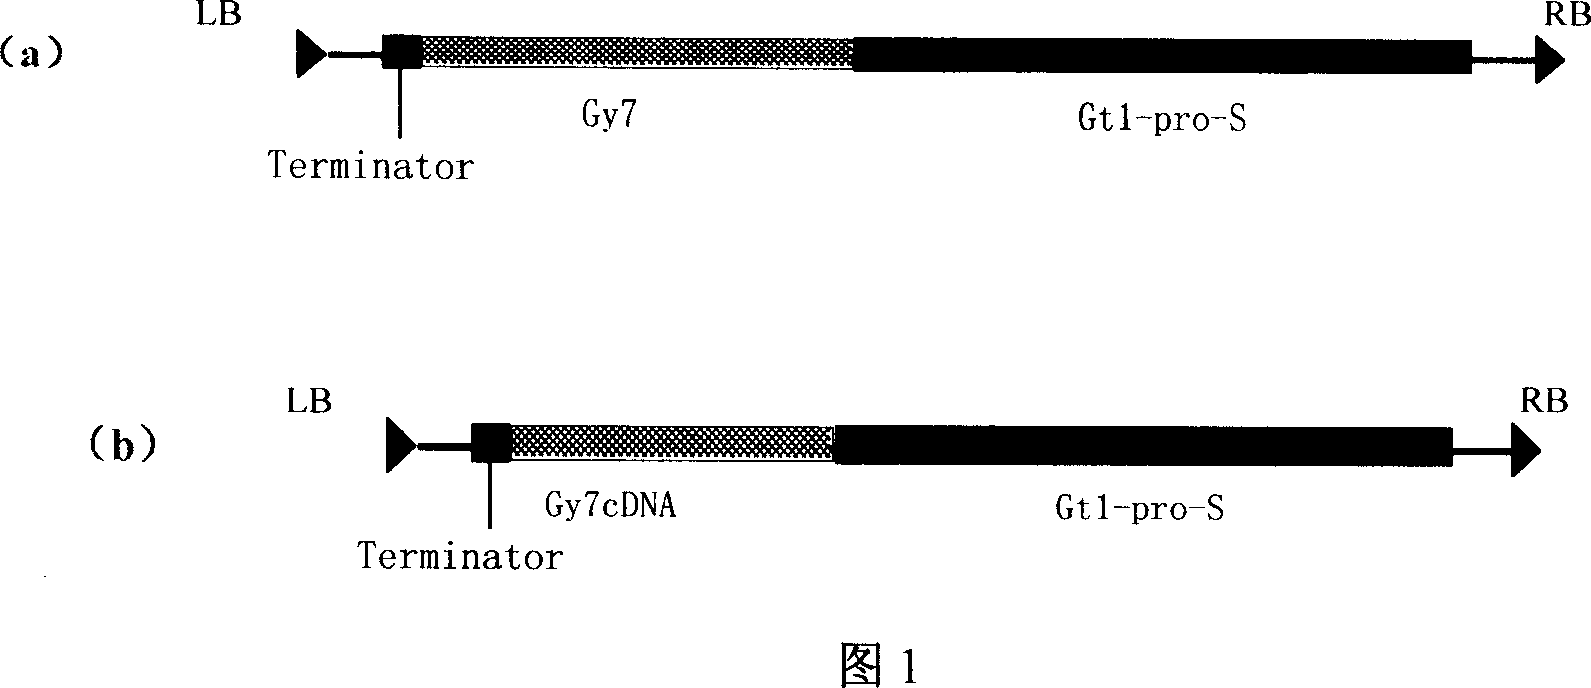 Expression vector for improving content and quality of protein in rice corn and its making method and use